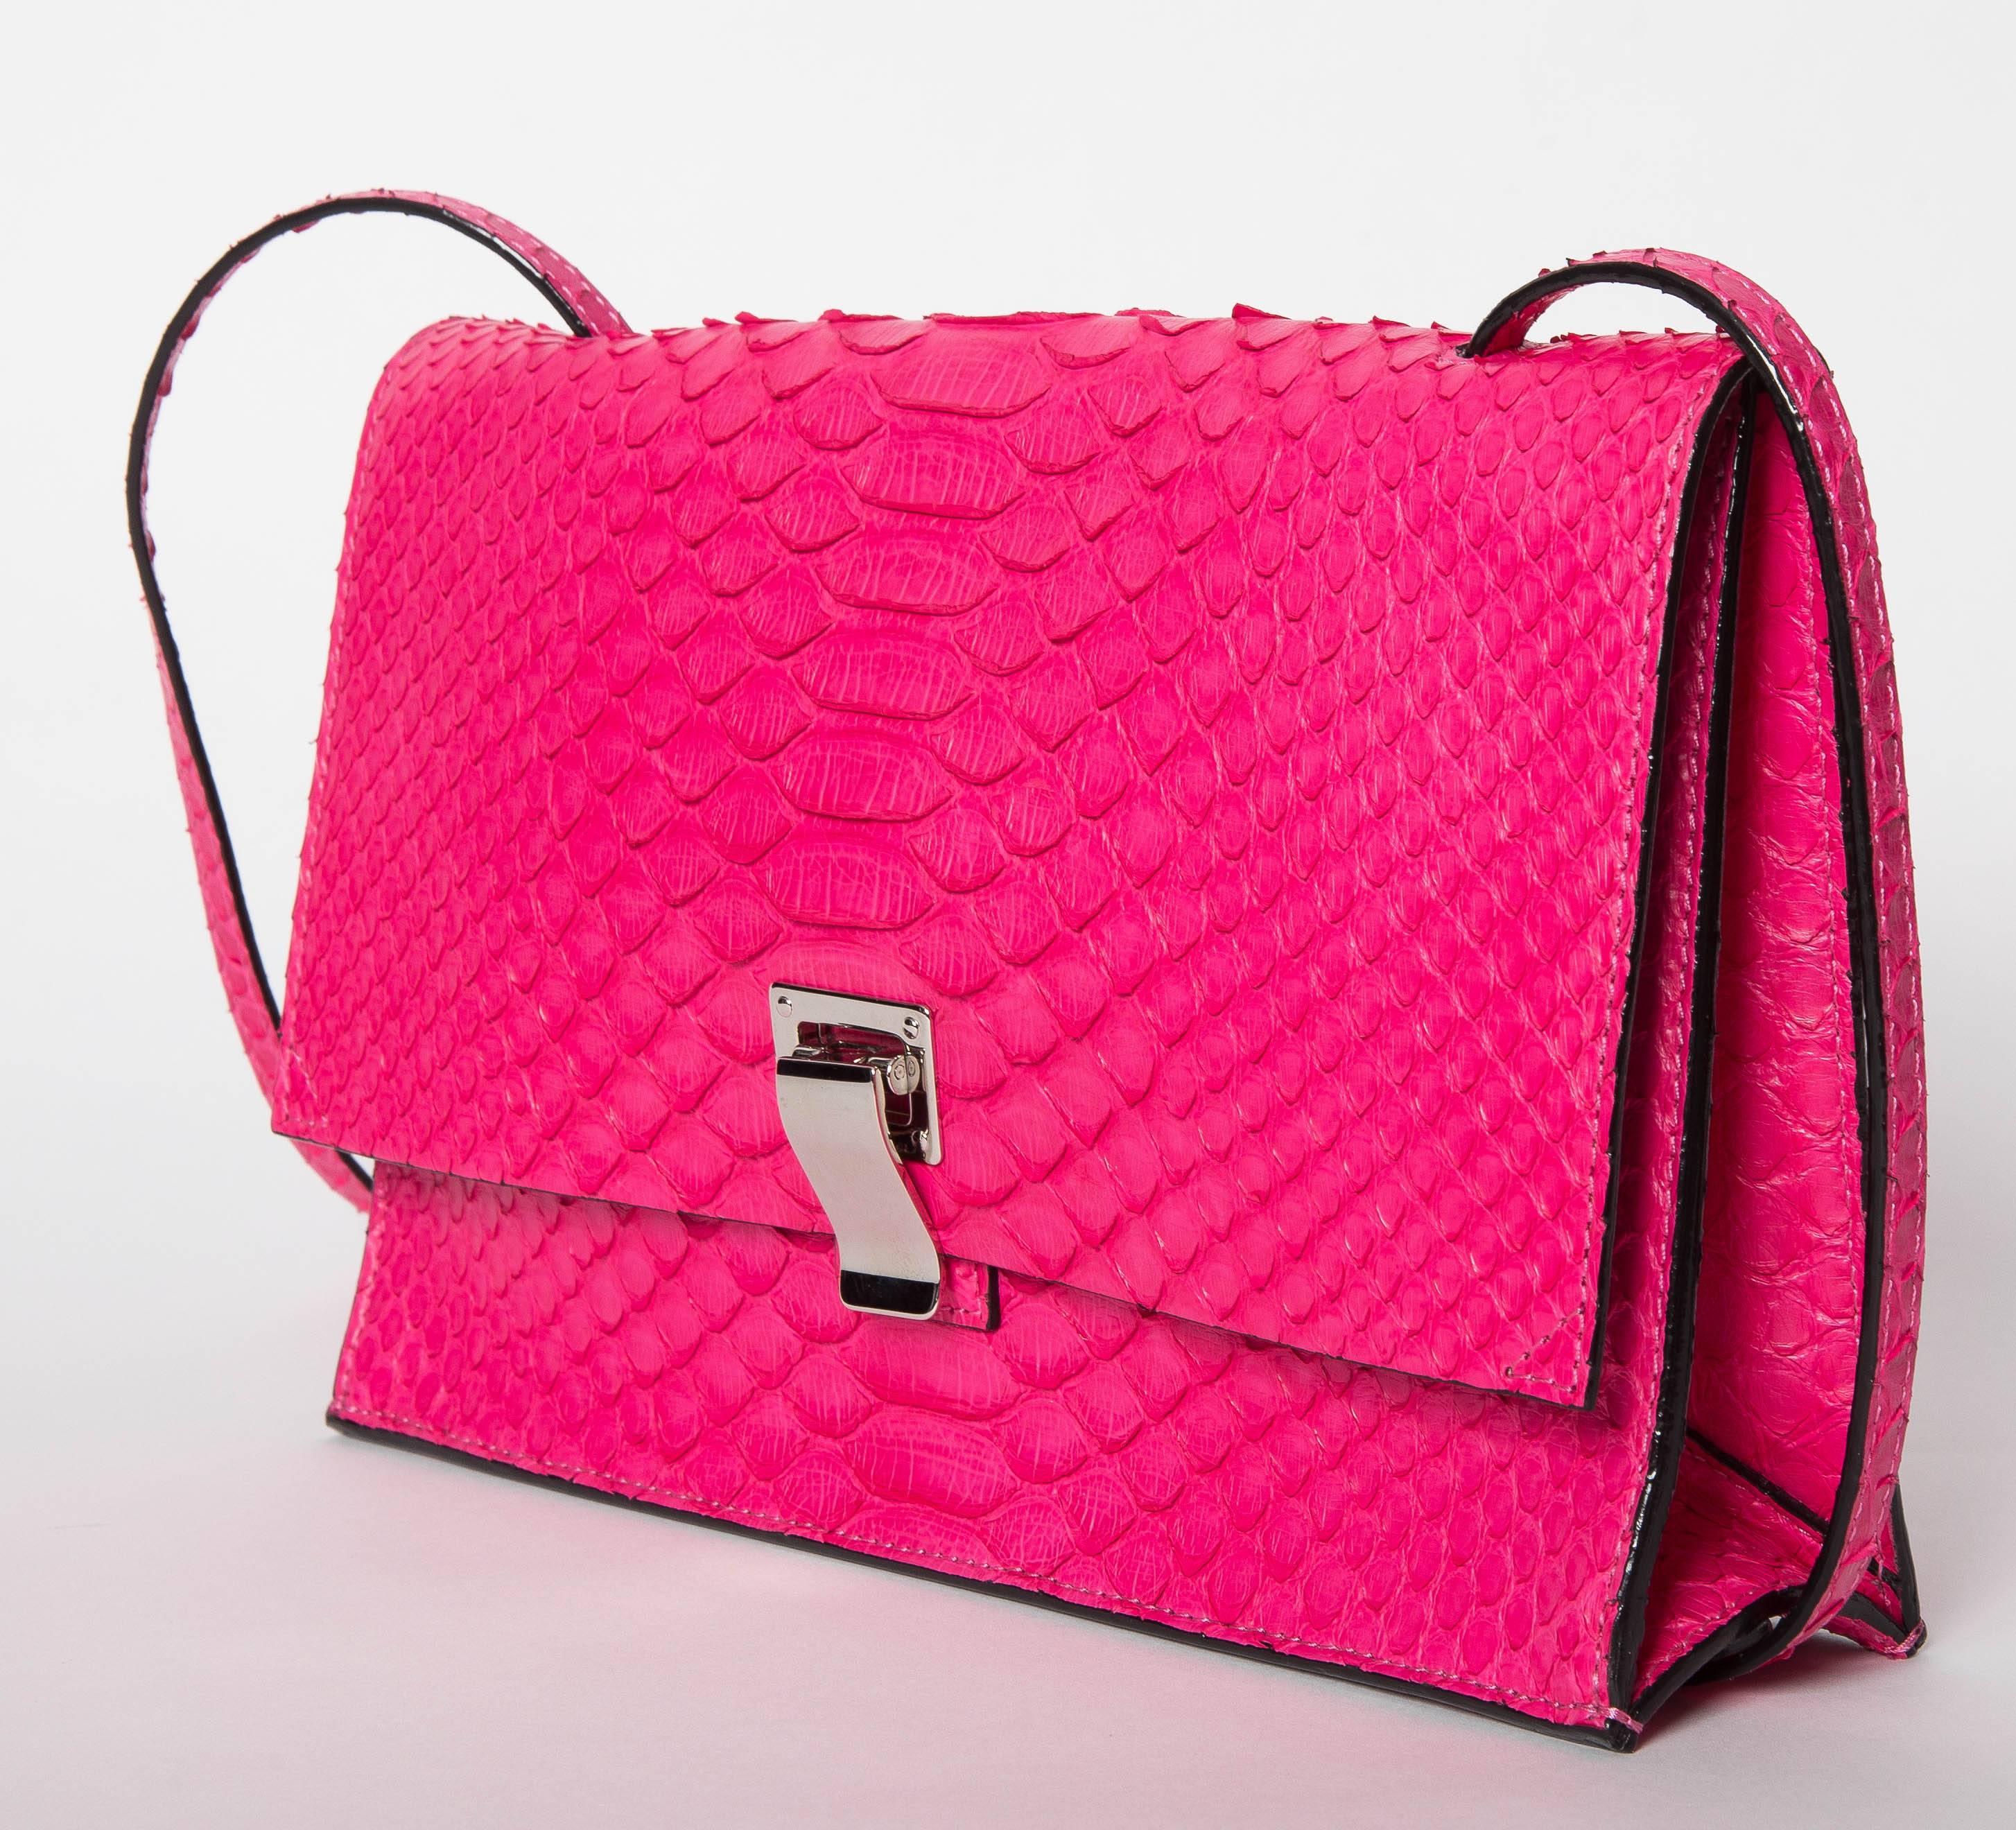 Proenza Schouler Hot Pink Python Shoulder Bag with Palladium Hardware.
Shoulder Strap is Adjustable and long enough for the bag to be worn as a crossbody. The bag is lined in a metallic grey leather and has one outside pocket. 
As we do not hold the